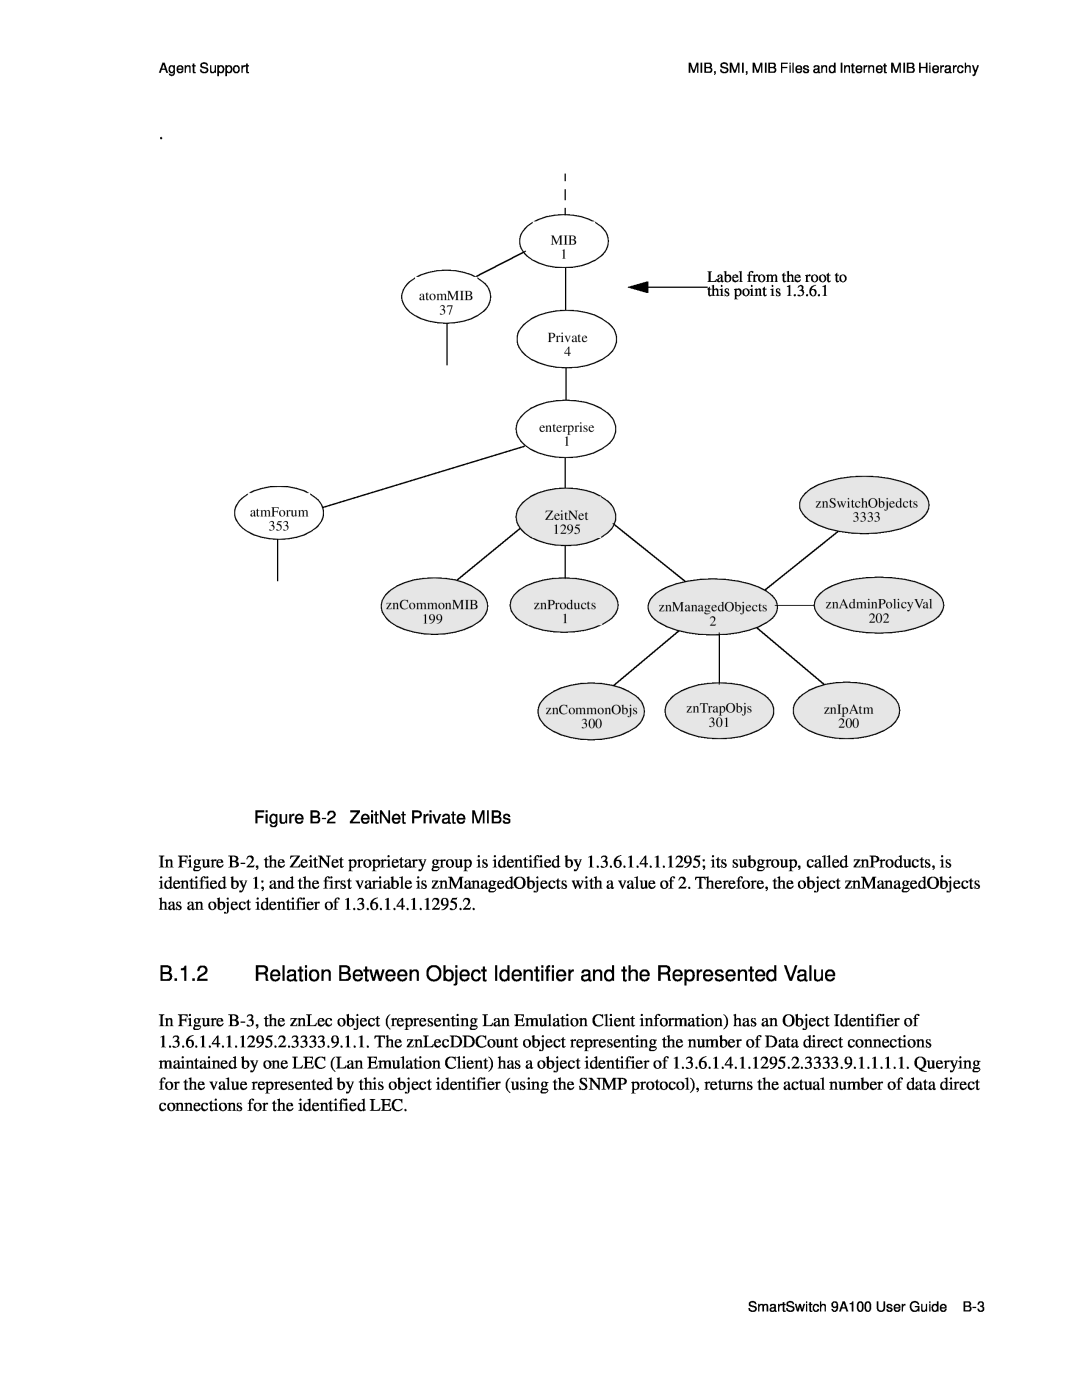 Cabletron Systems 9A100 manual B.1.2 Relation Between Object Identifier and the Represented Value 